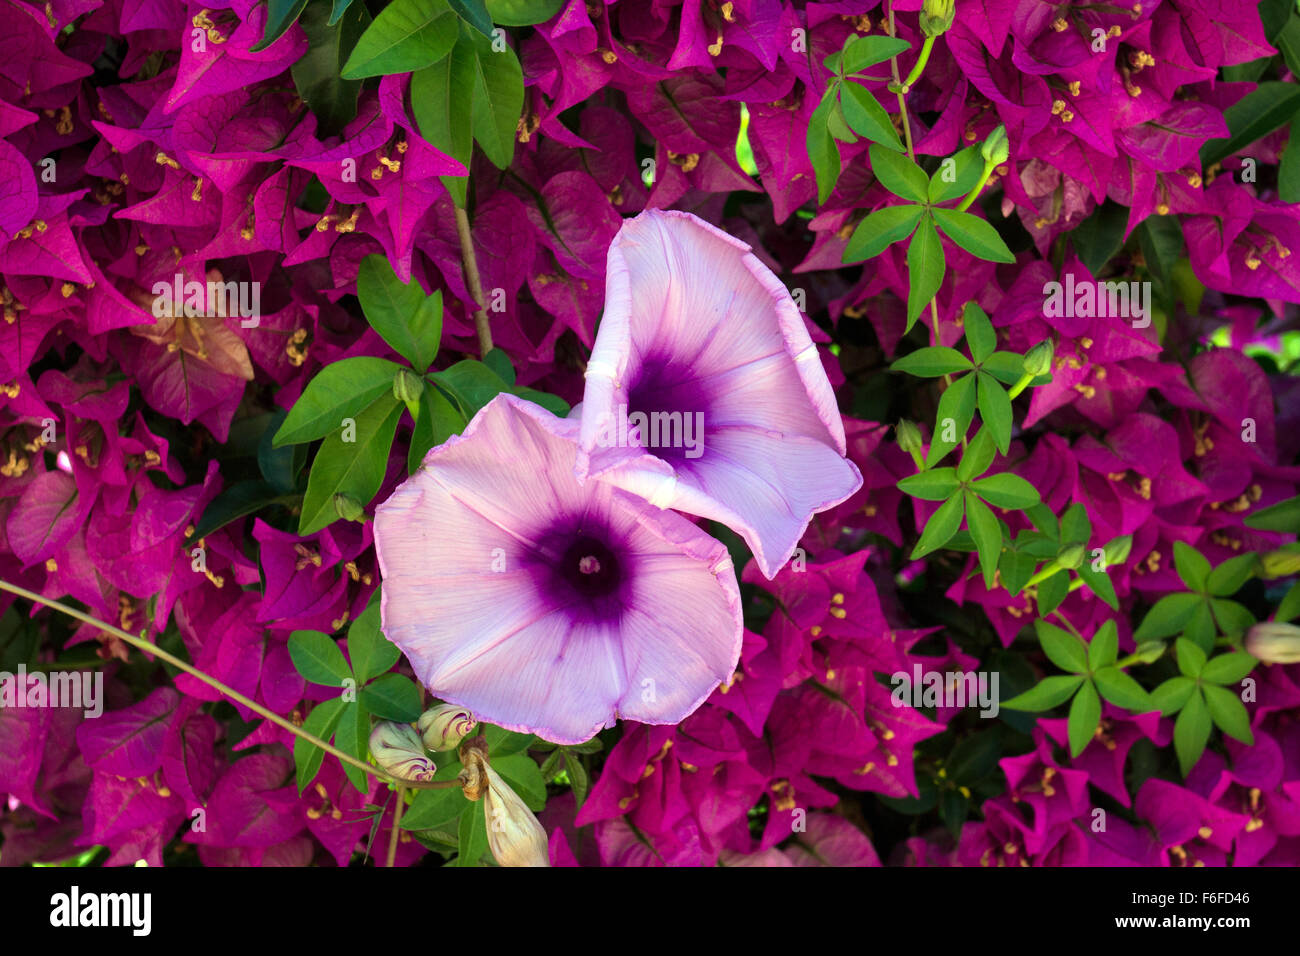 Brilliant pink flowers complementing each other. Stock Photo